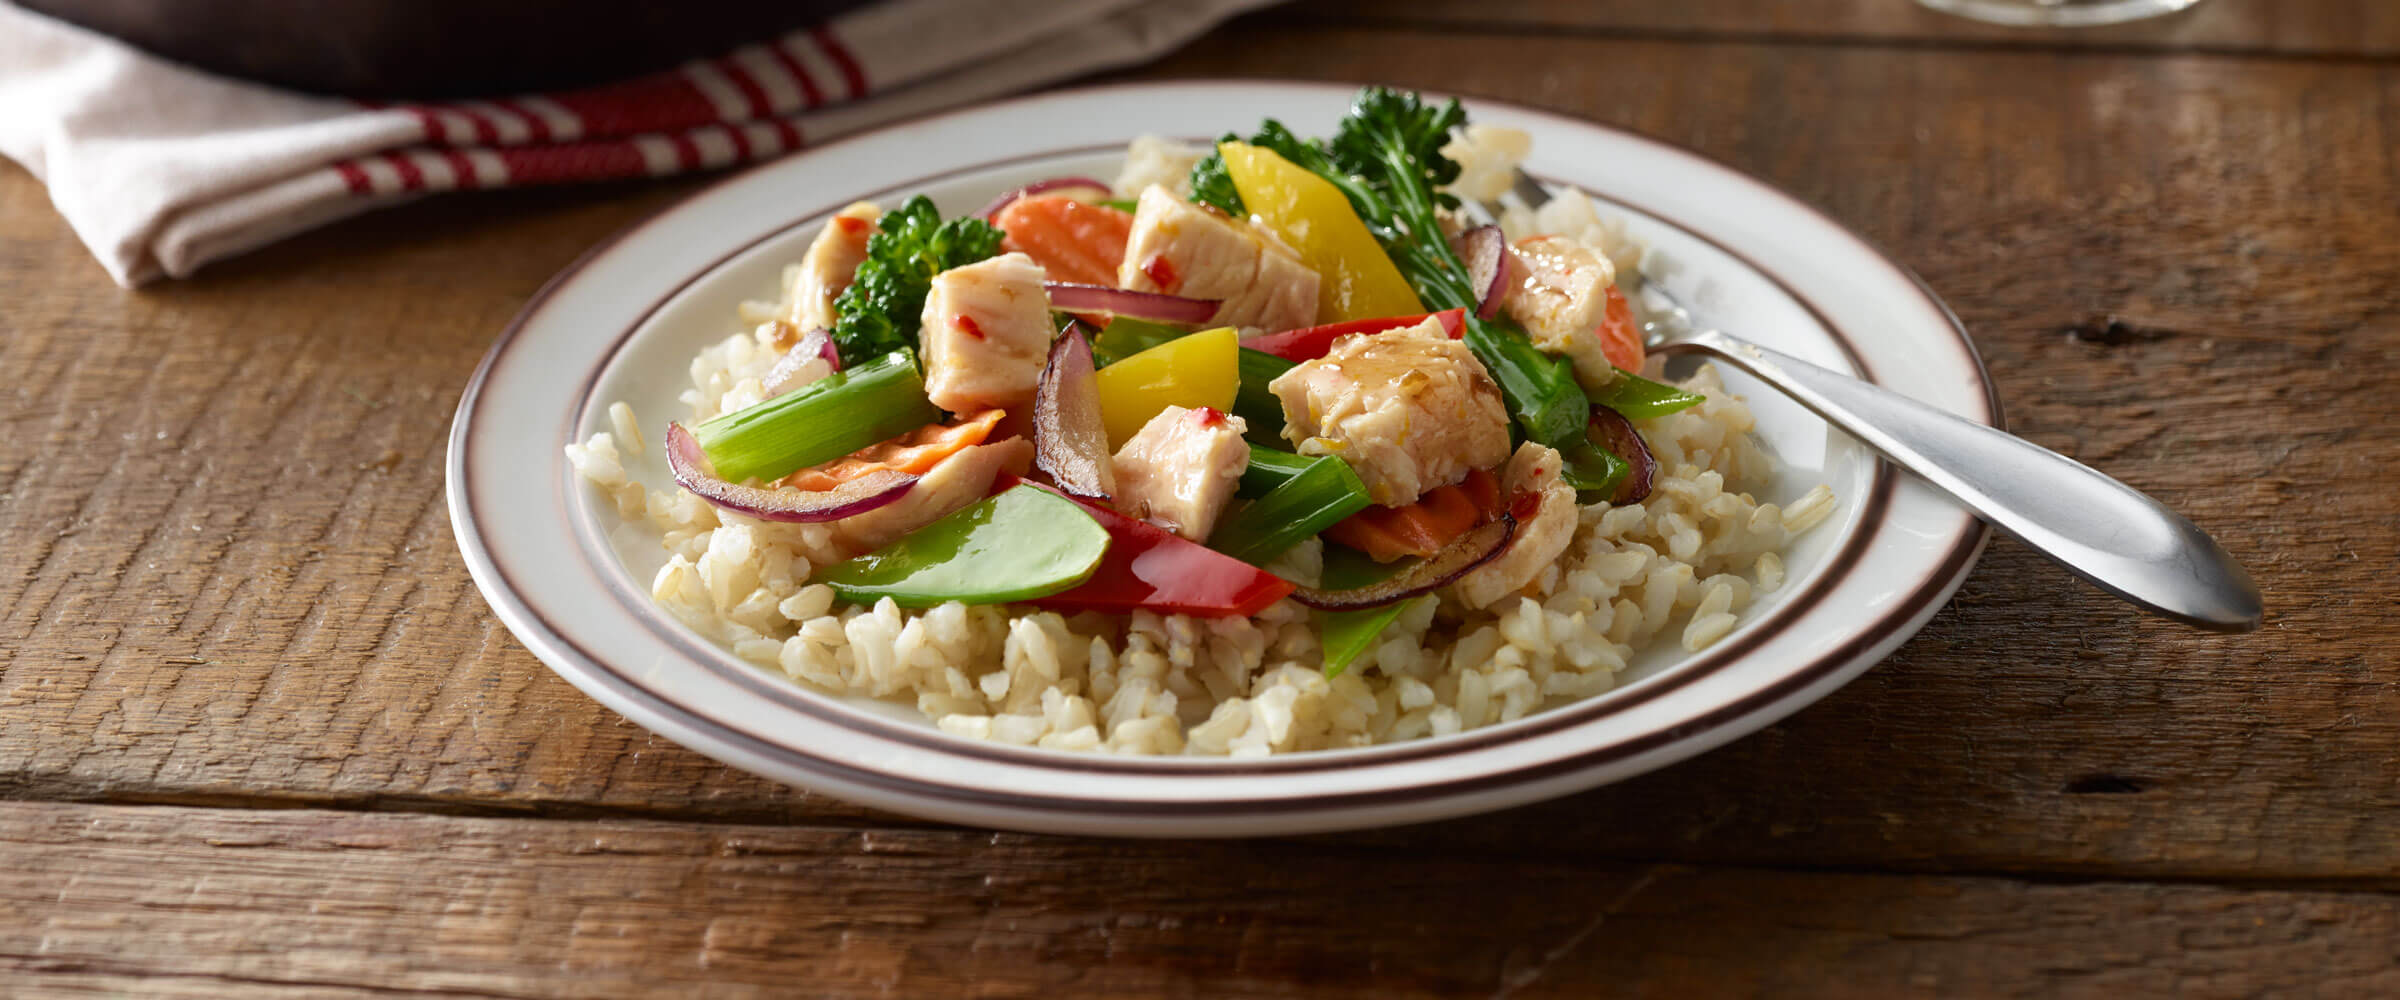 Citrus Chicken Stir-Fry over rice on plate with fork